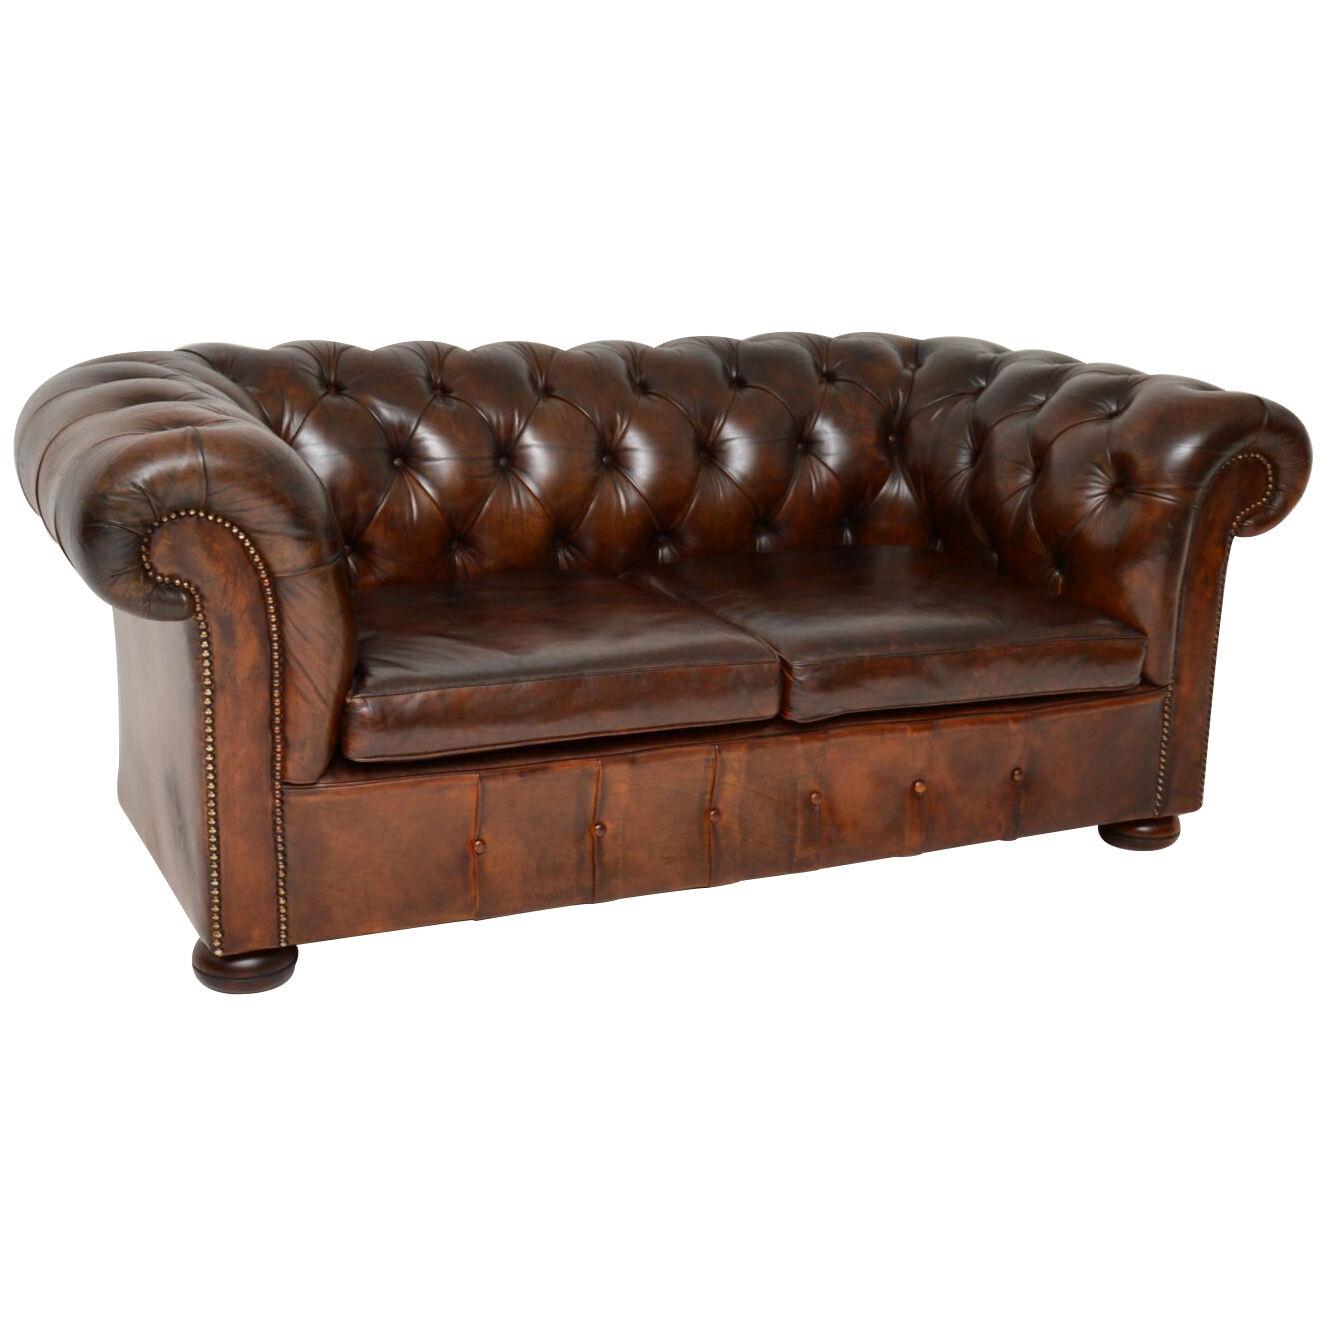 Antique Leather Two Seat Chesterfield Sofa